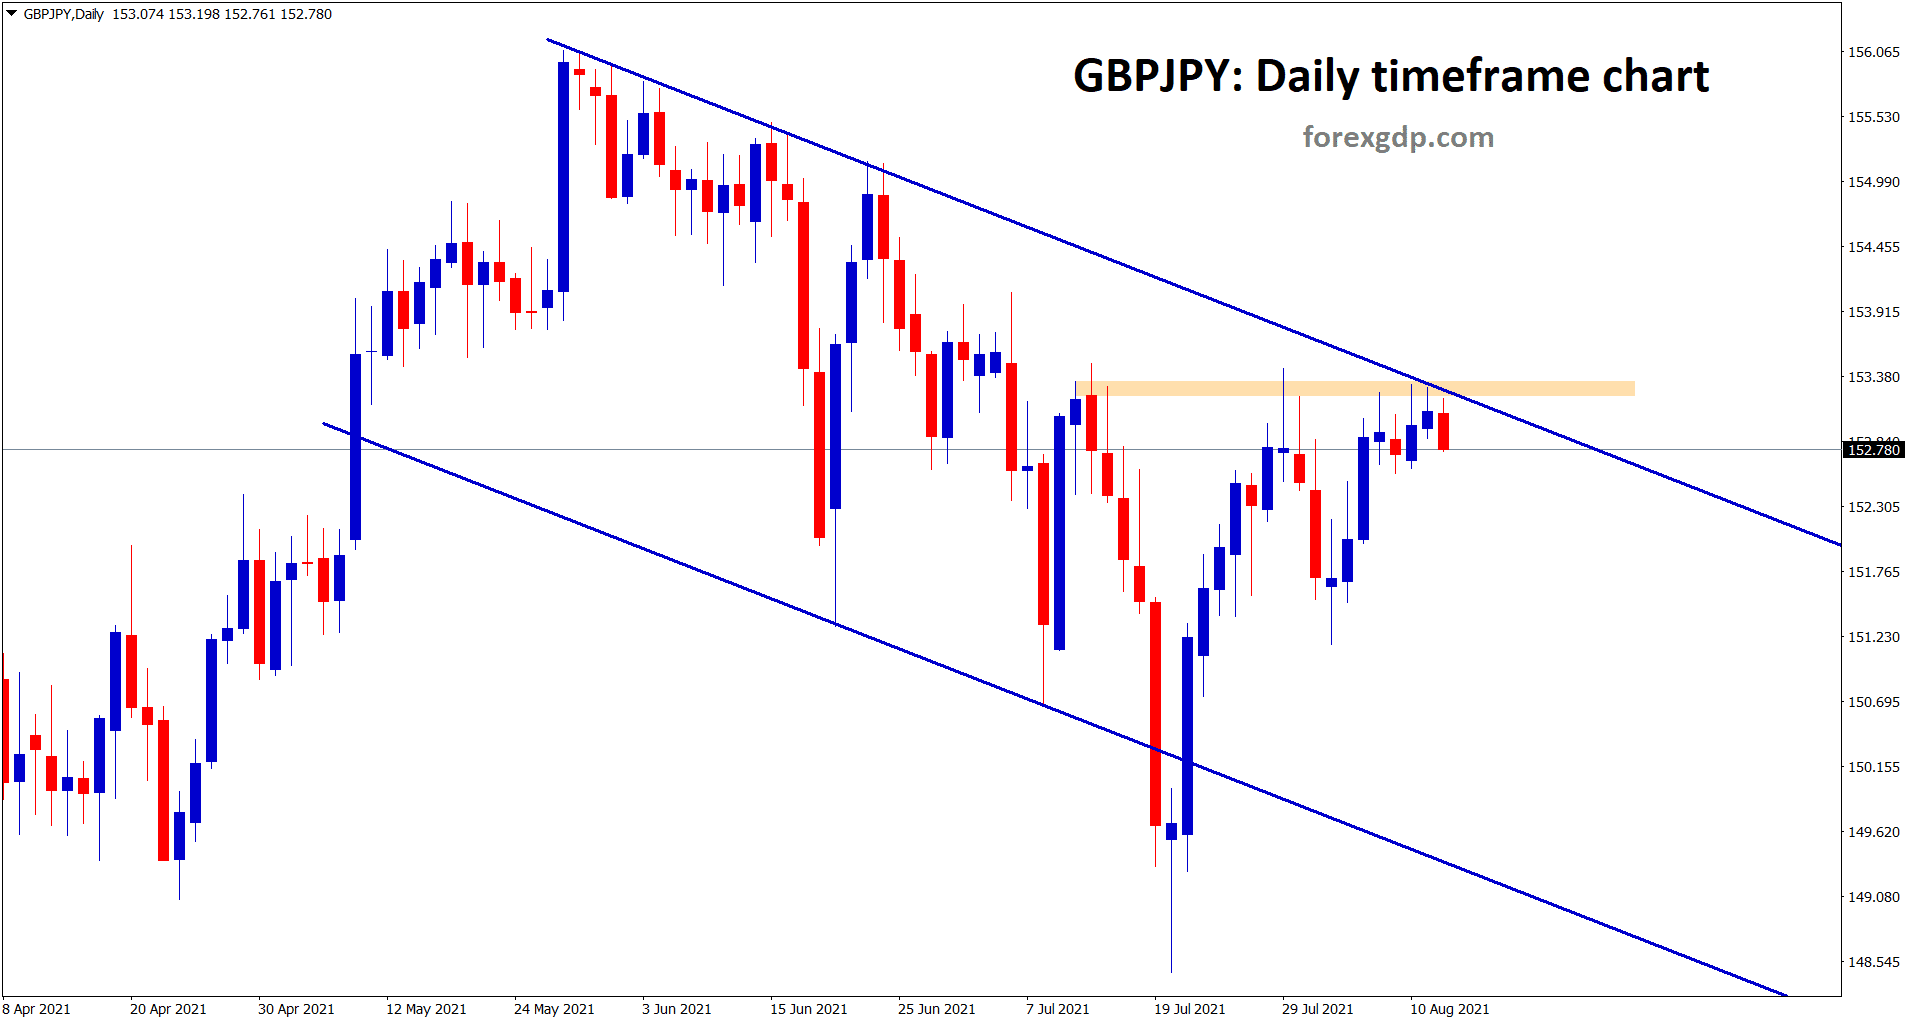 GBPJPY is falling down from the horizontal resistance and lower high zone of the descending downtrend channel in the daily timeframe